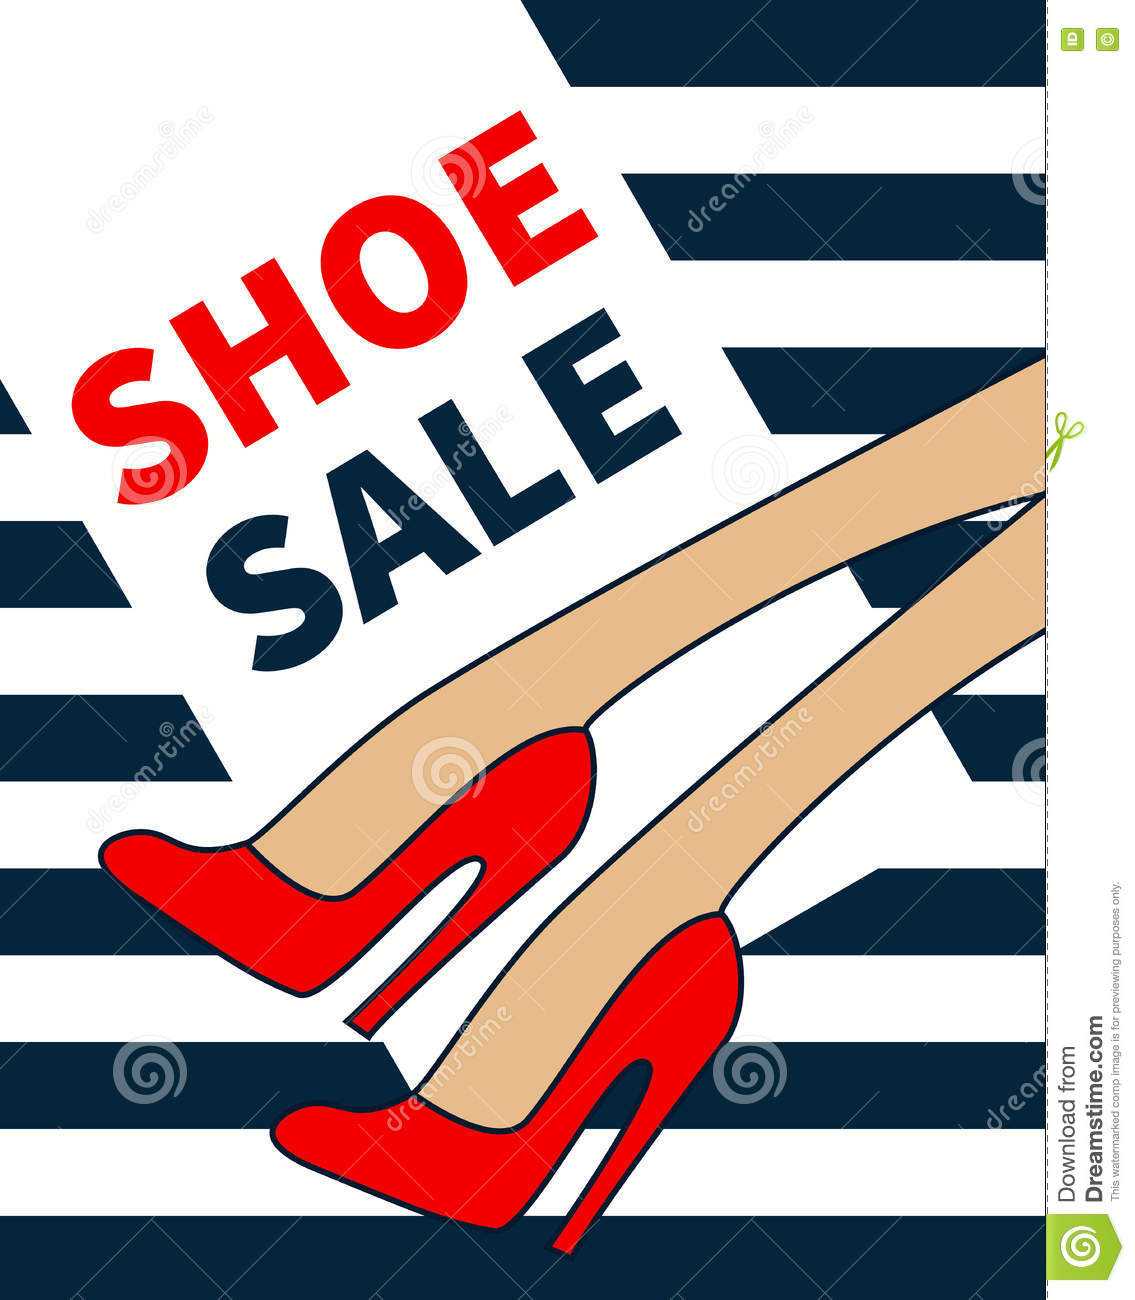 Vector Shoe Sale Stock Vector. Illustration Of Heels – 80561068 For High Heel Template For Cards